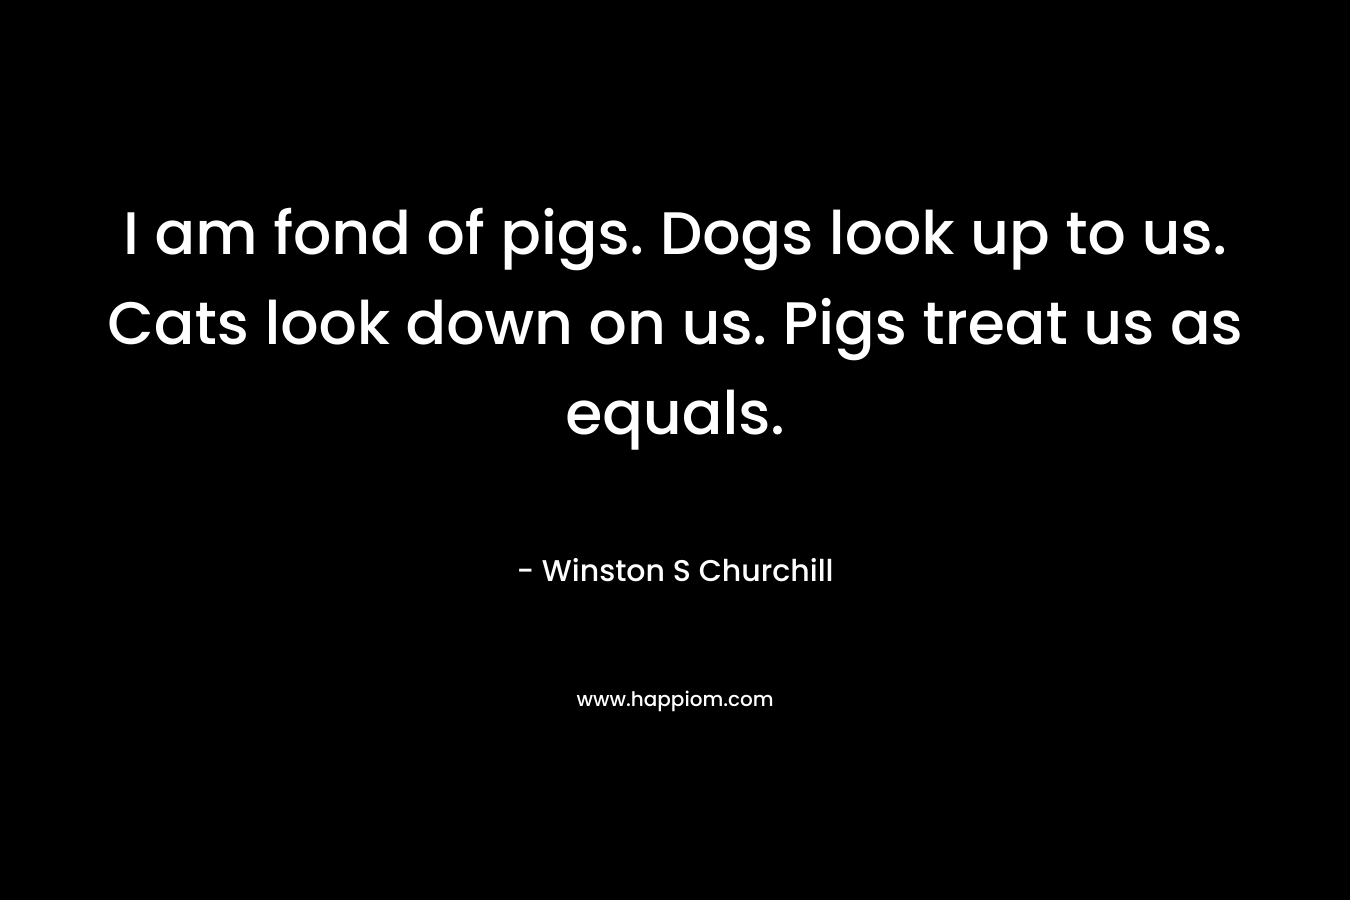 I am fond of pigs. Dogs look up to us. Cats look down on us. Pigs treat us as equals. – Winston S Churchill